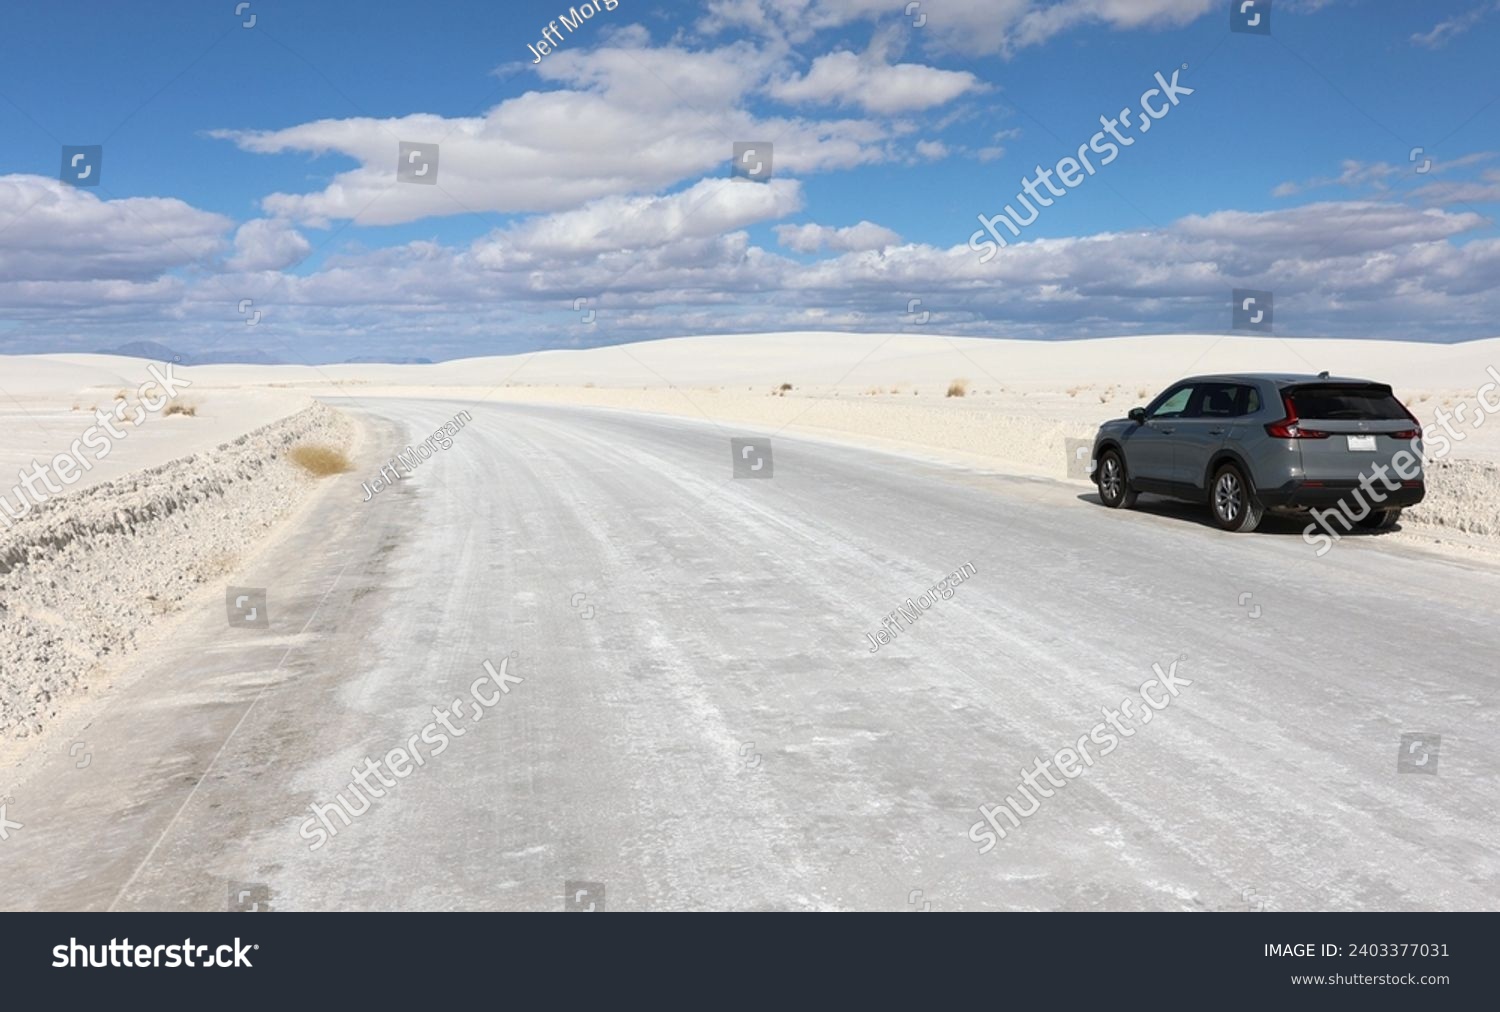 On the gypsum Dunes Drive Road at White Sands National Park. #2403377031